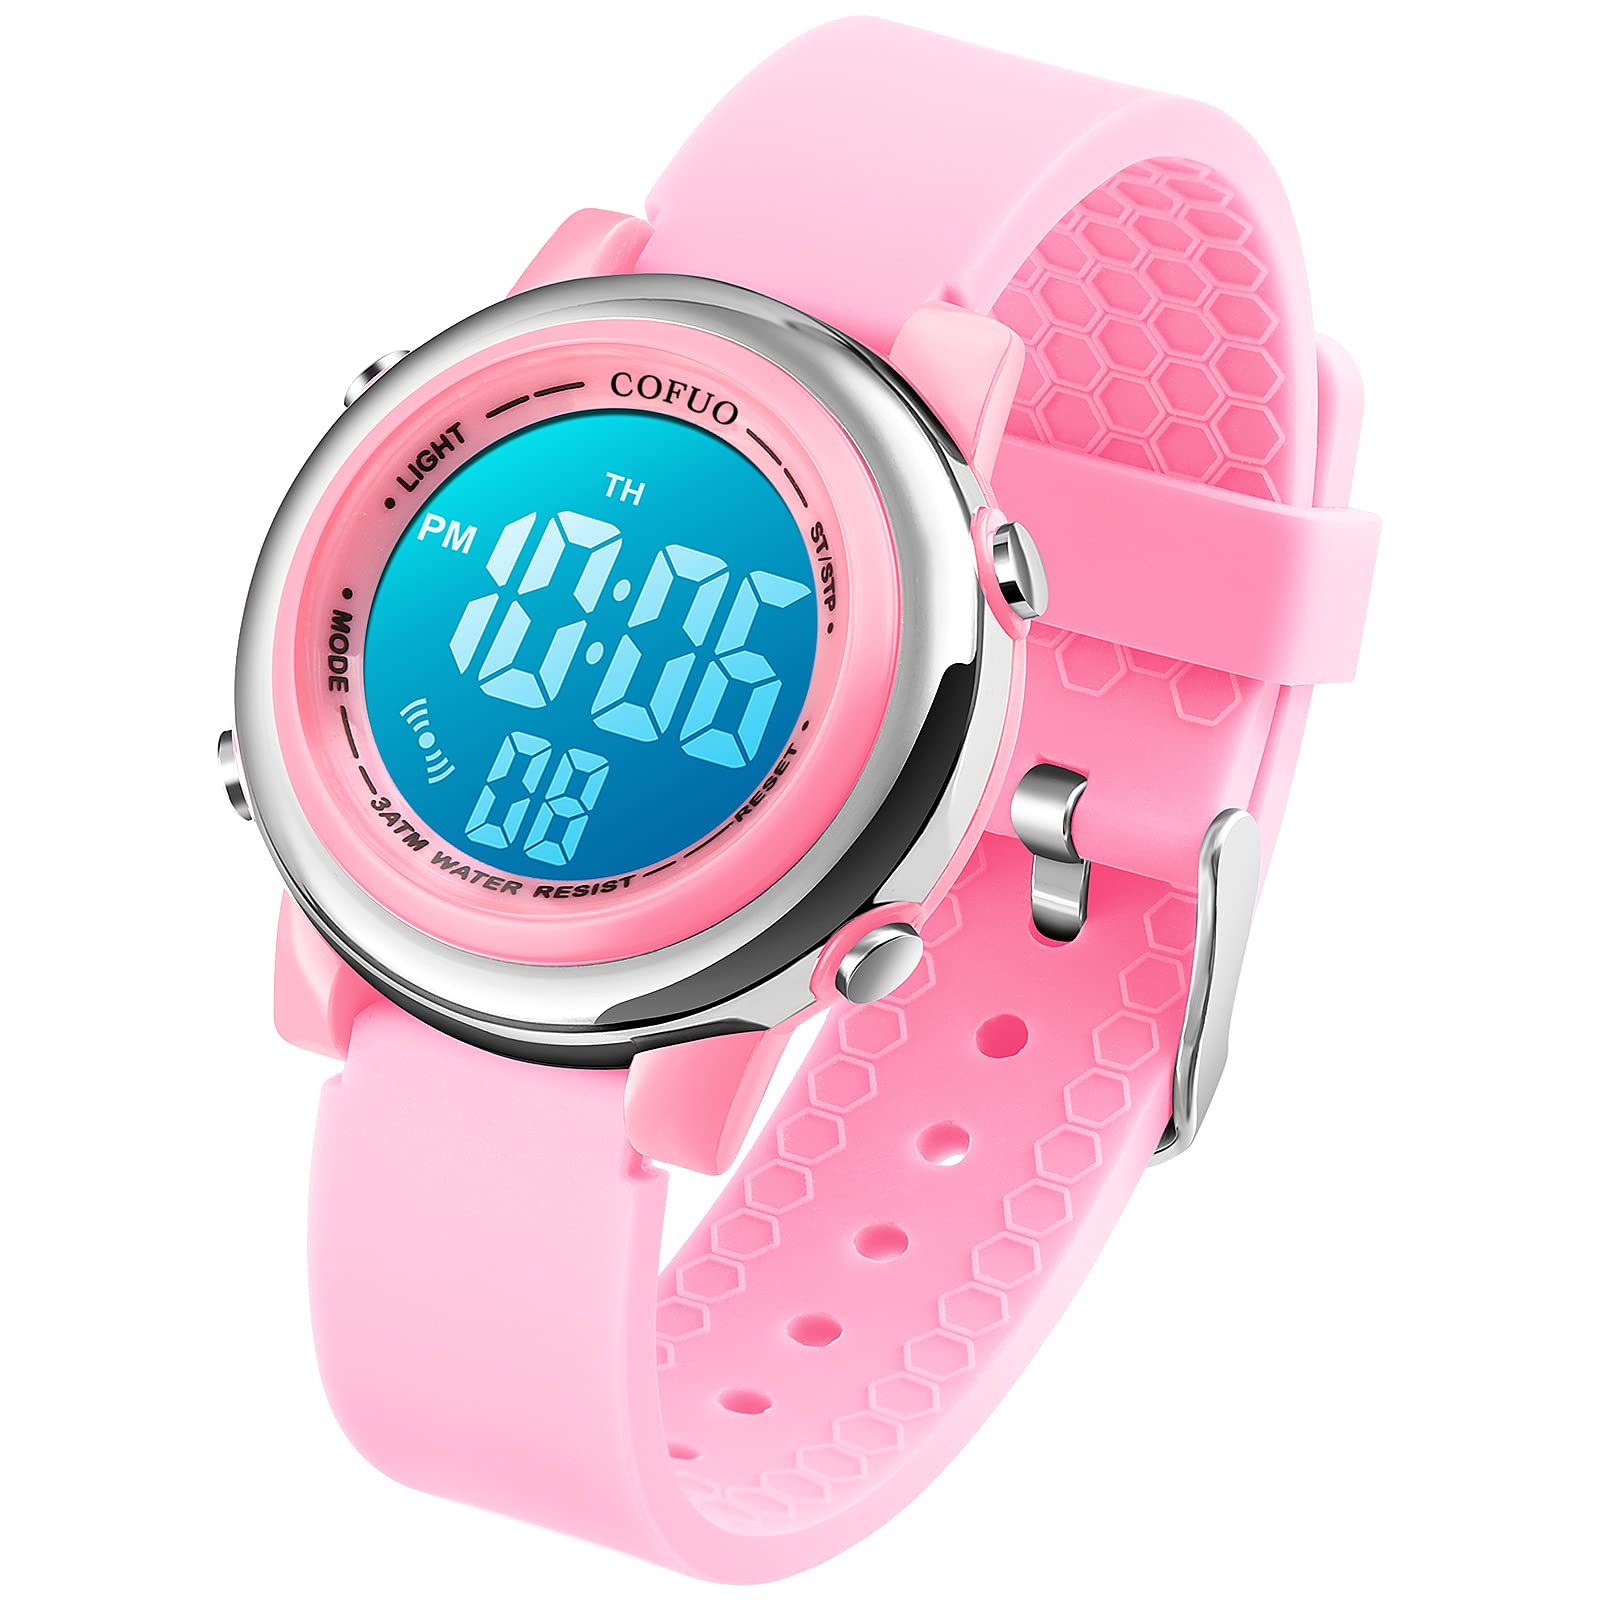 cofuo Kids Digital Sport Waterproof Watch for Girls Boys Kid Sports Outdoor LED Electrical Watches with Luminous Alarm Stopw